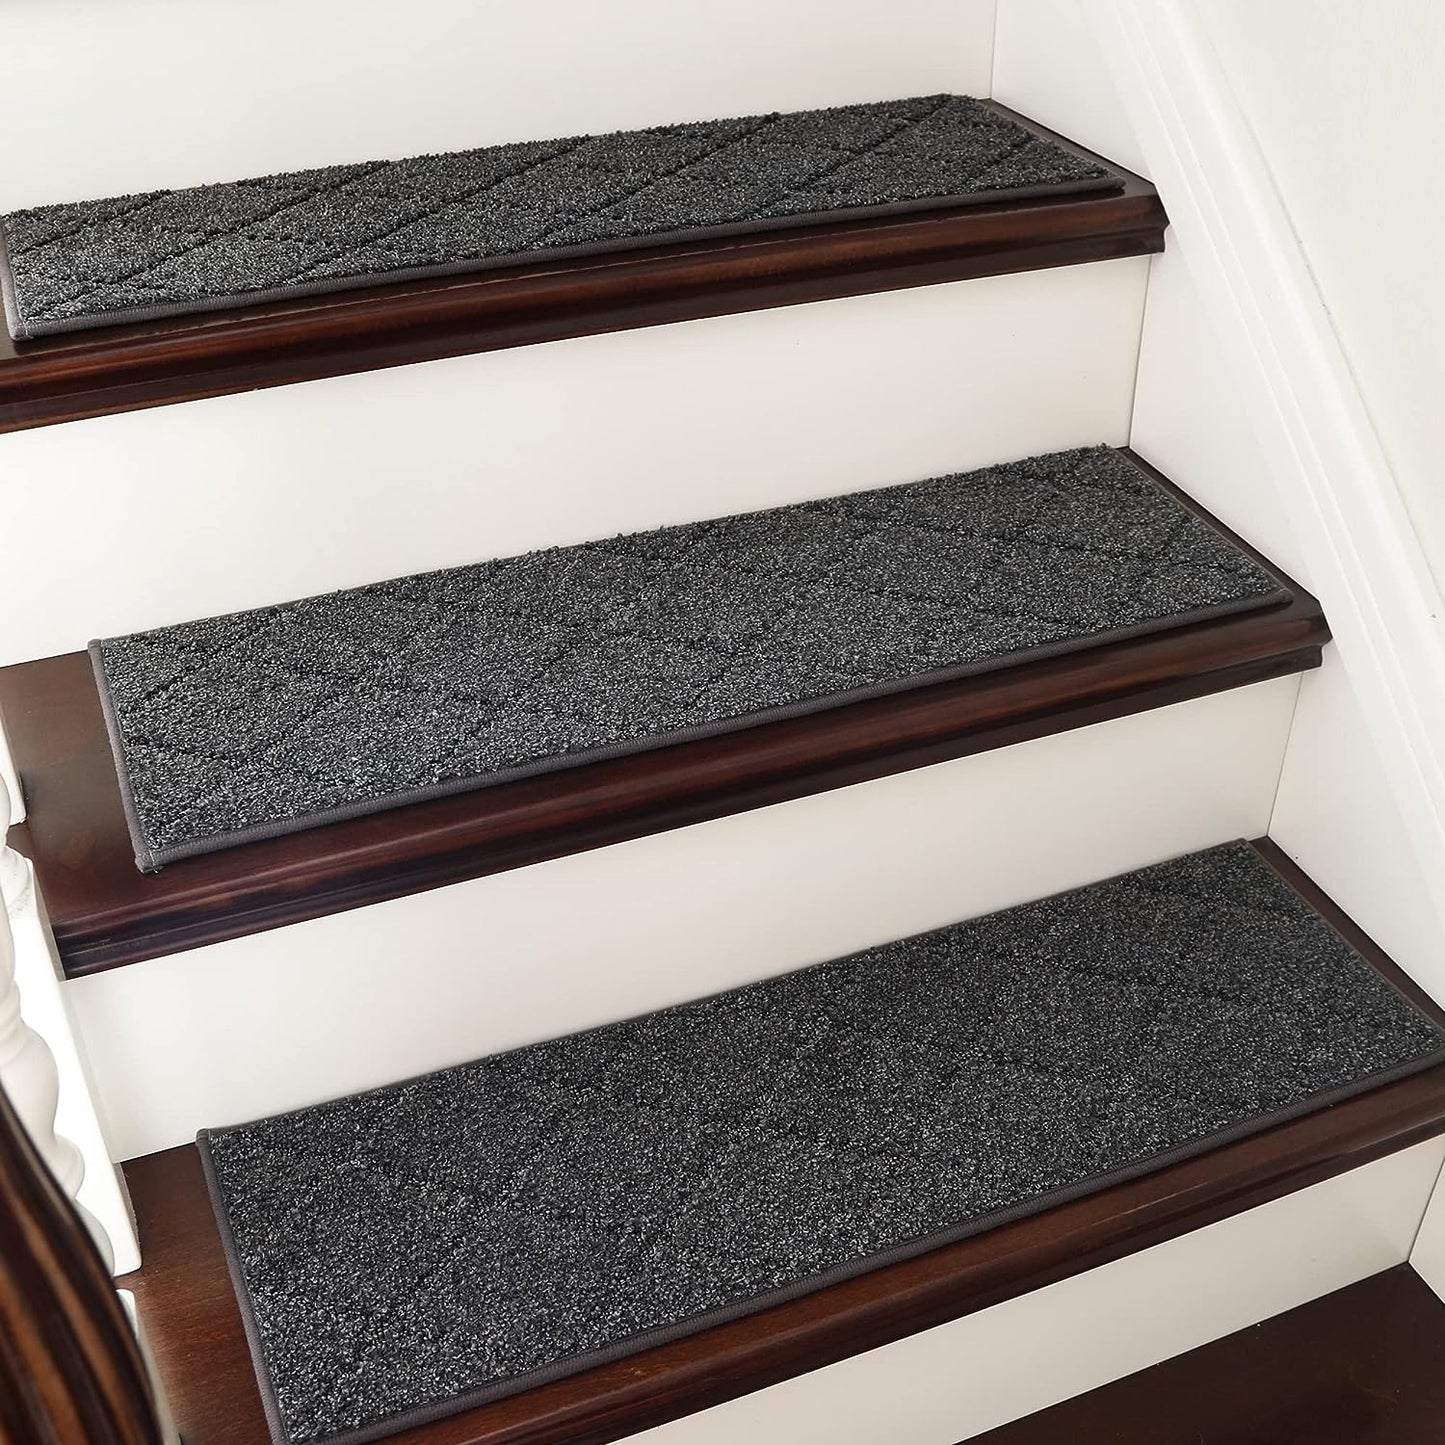 COSY HOMEER Edging Stair Treads Non-Slip Carpet Mat 28inX9in Indoor Stair Runners for Wooden Steps (15pc, Black)